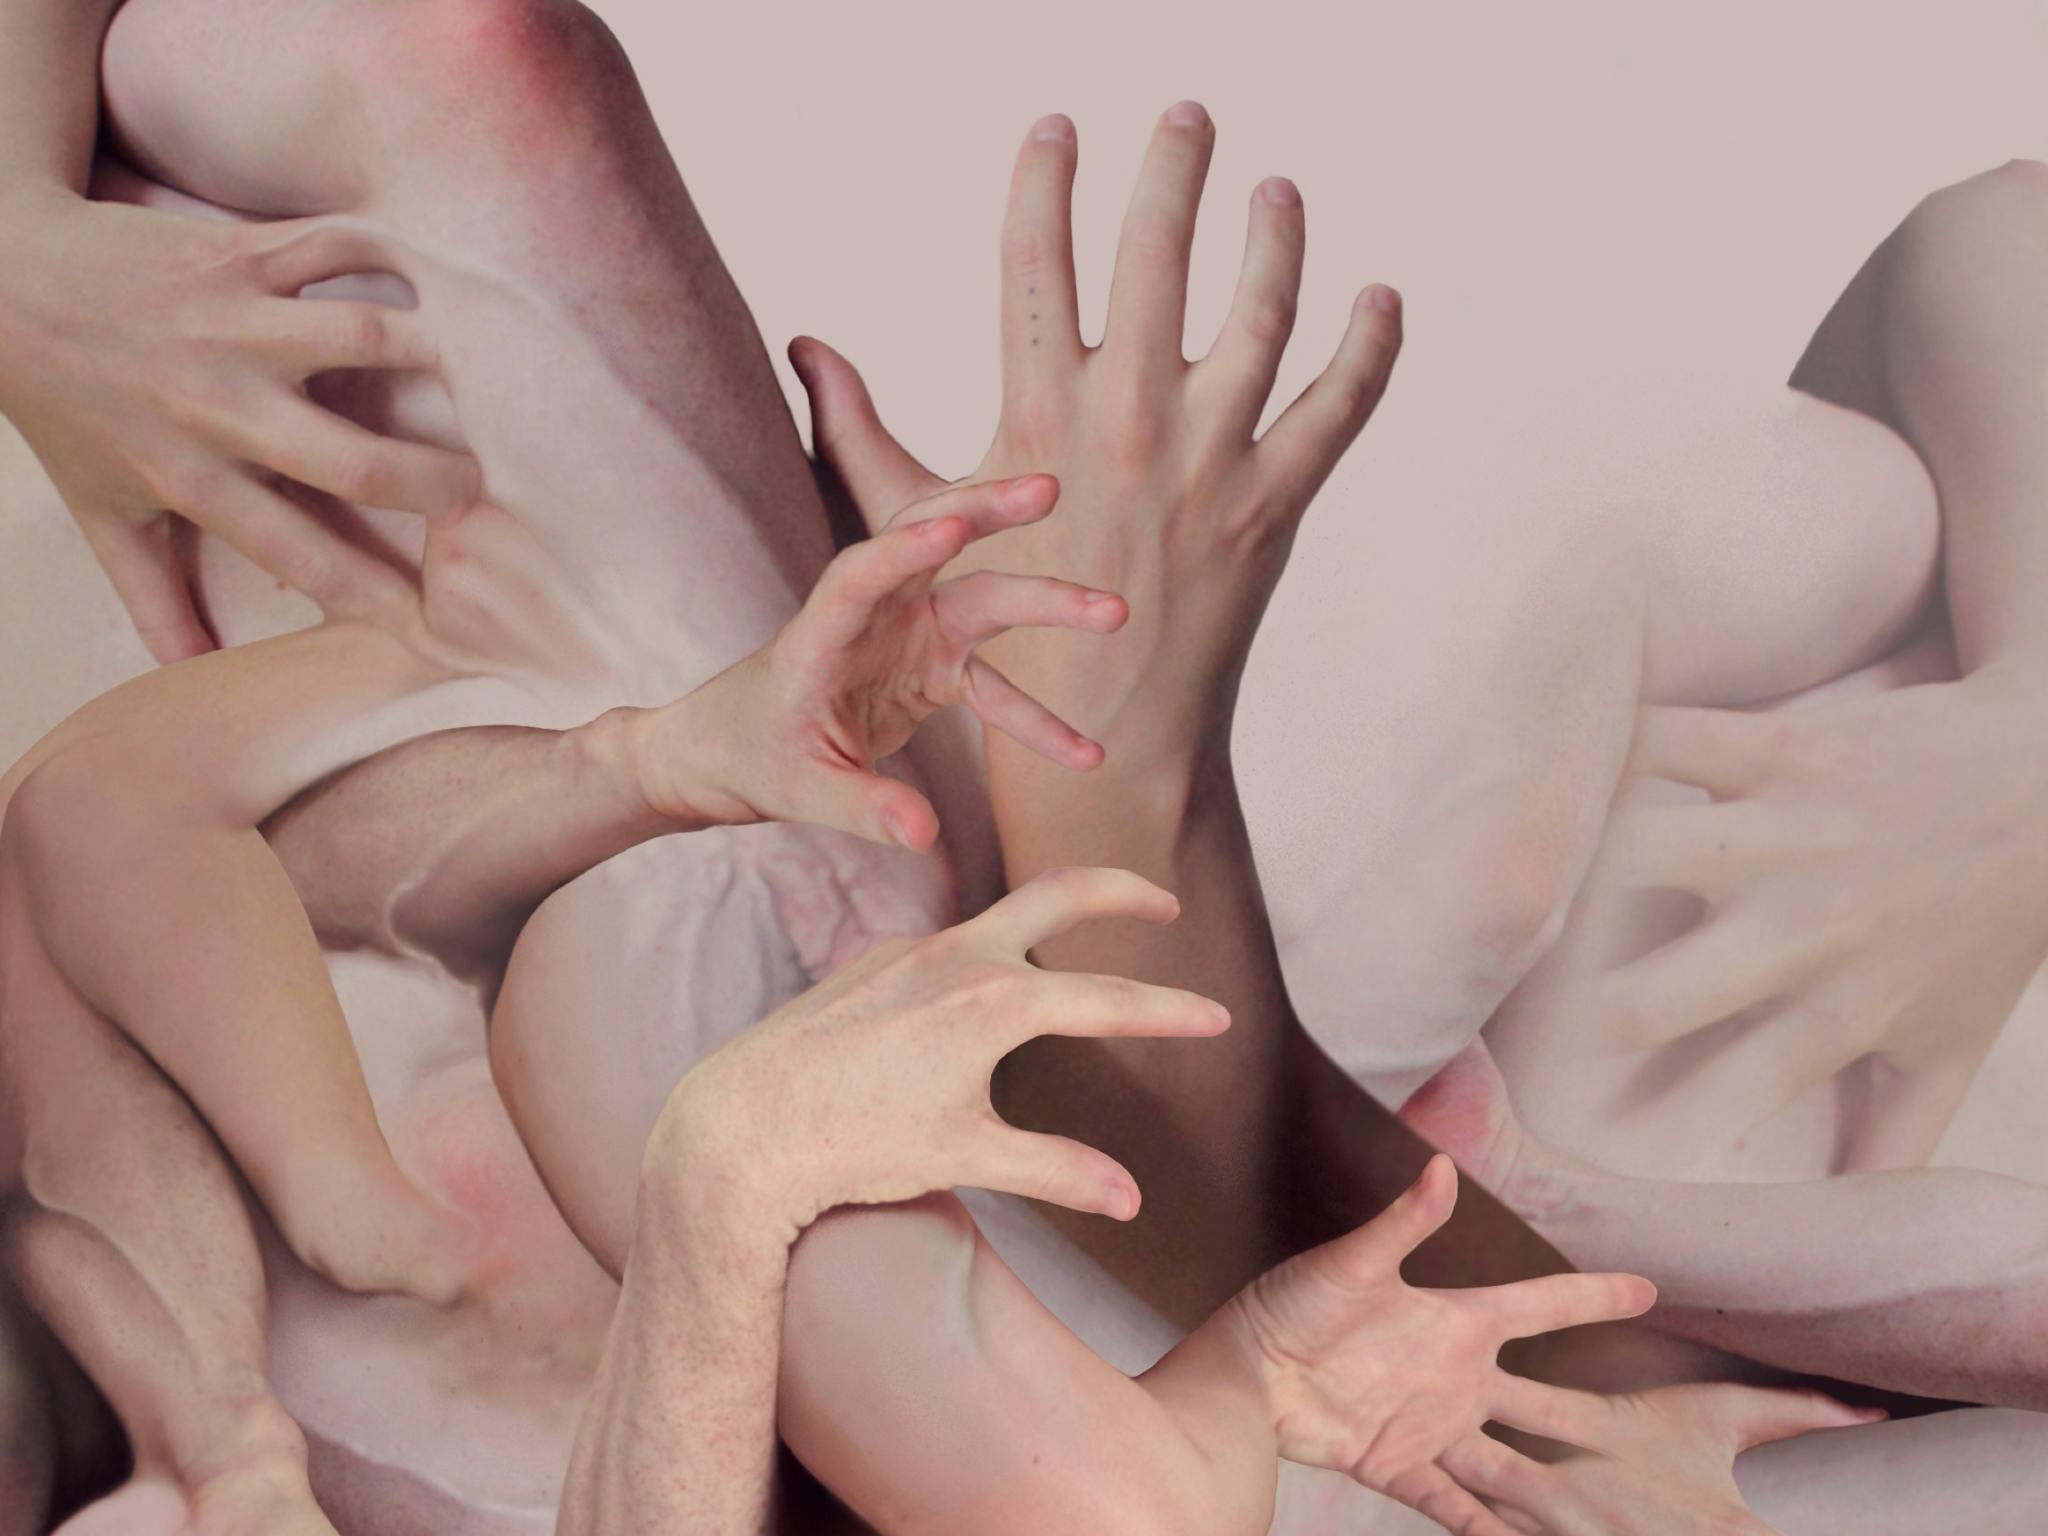 Graphic visualisation of hands clamoring against each other